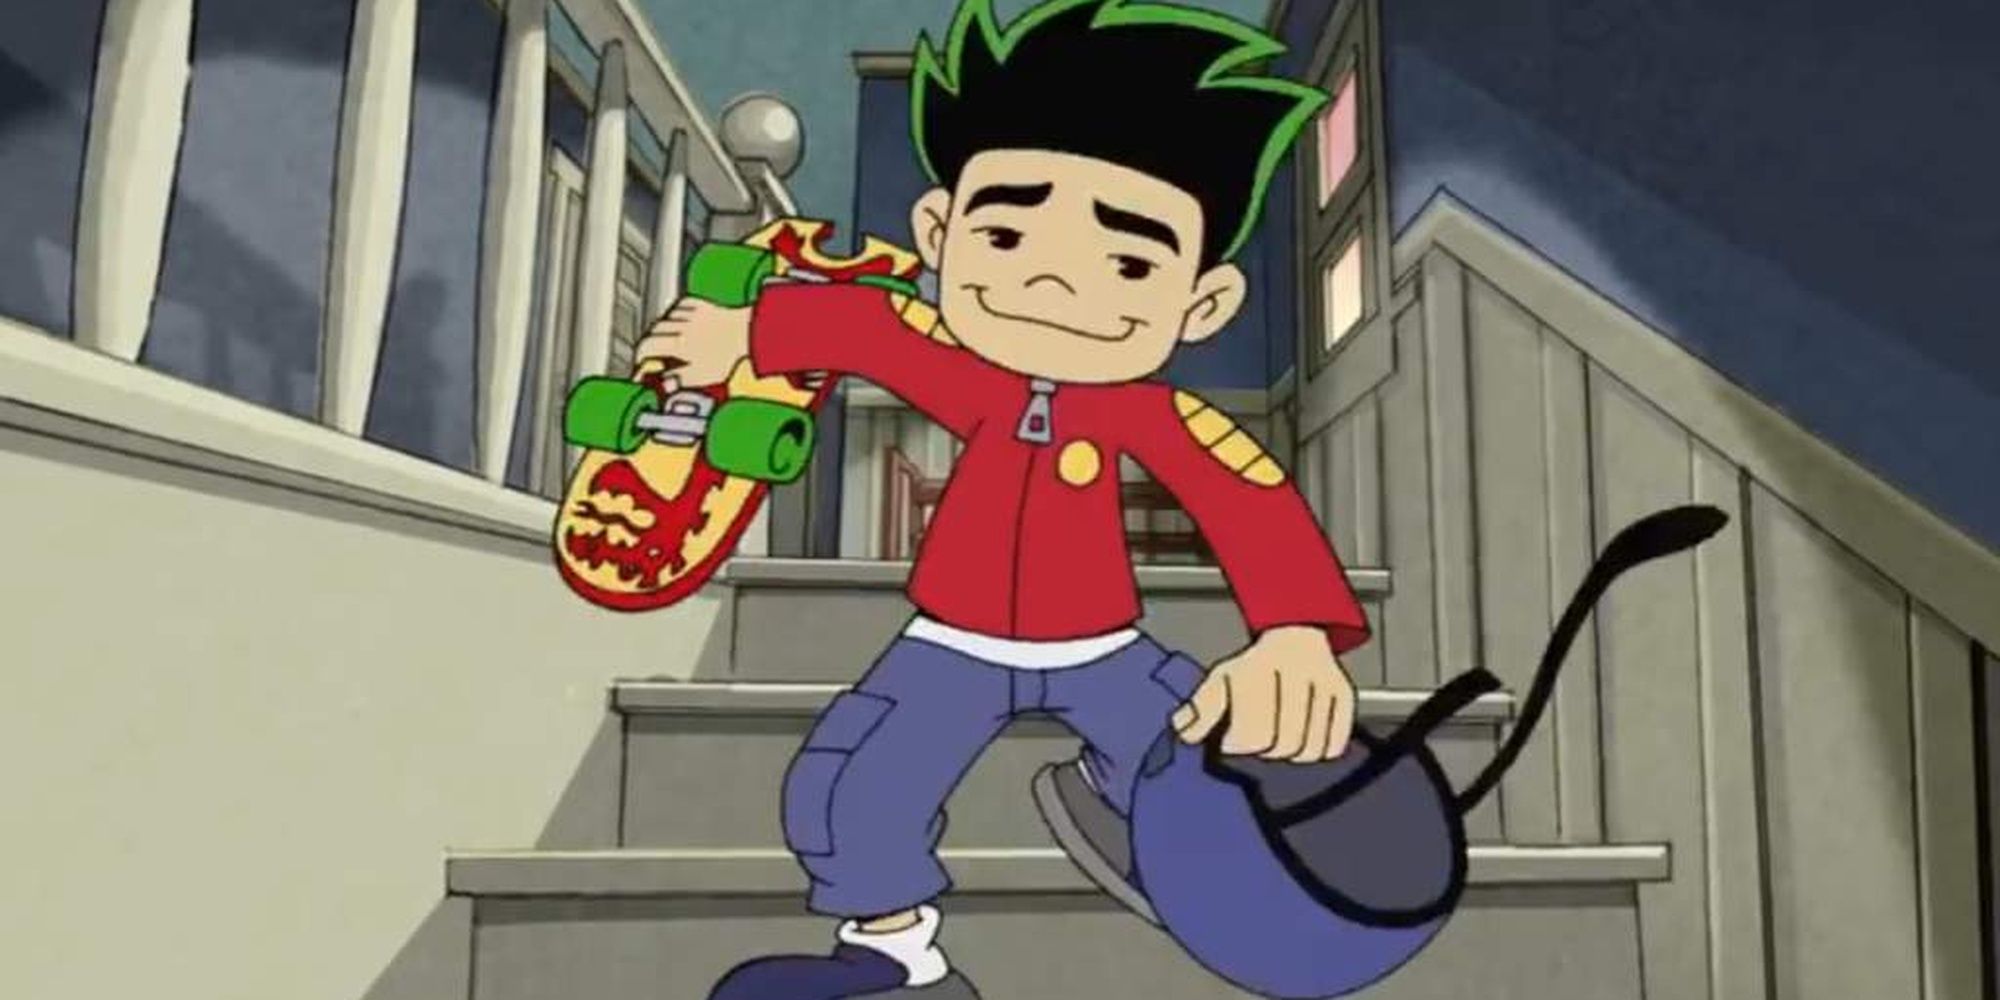 Jake Long heading out of his house with his skating gear.